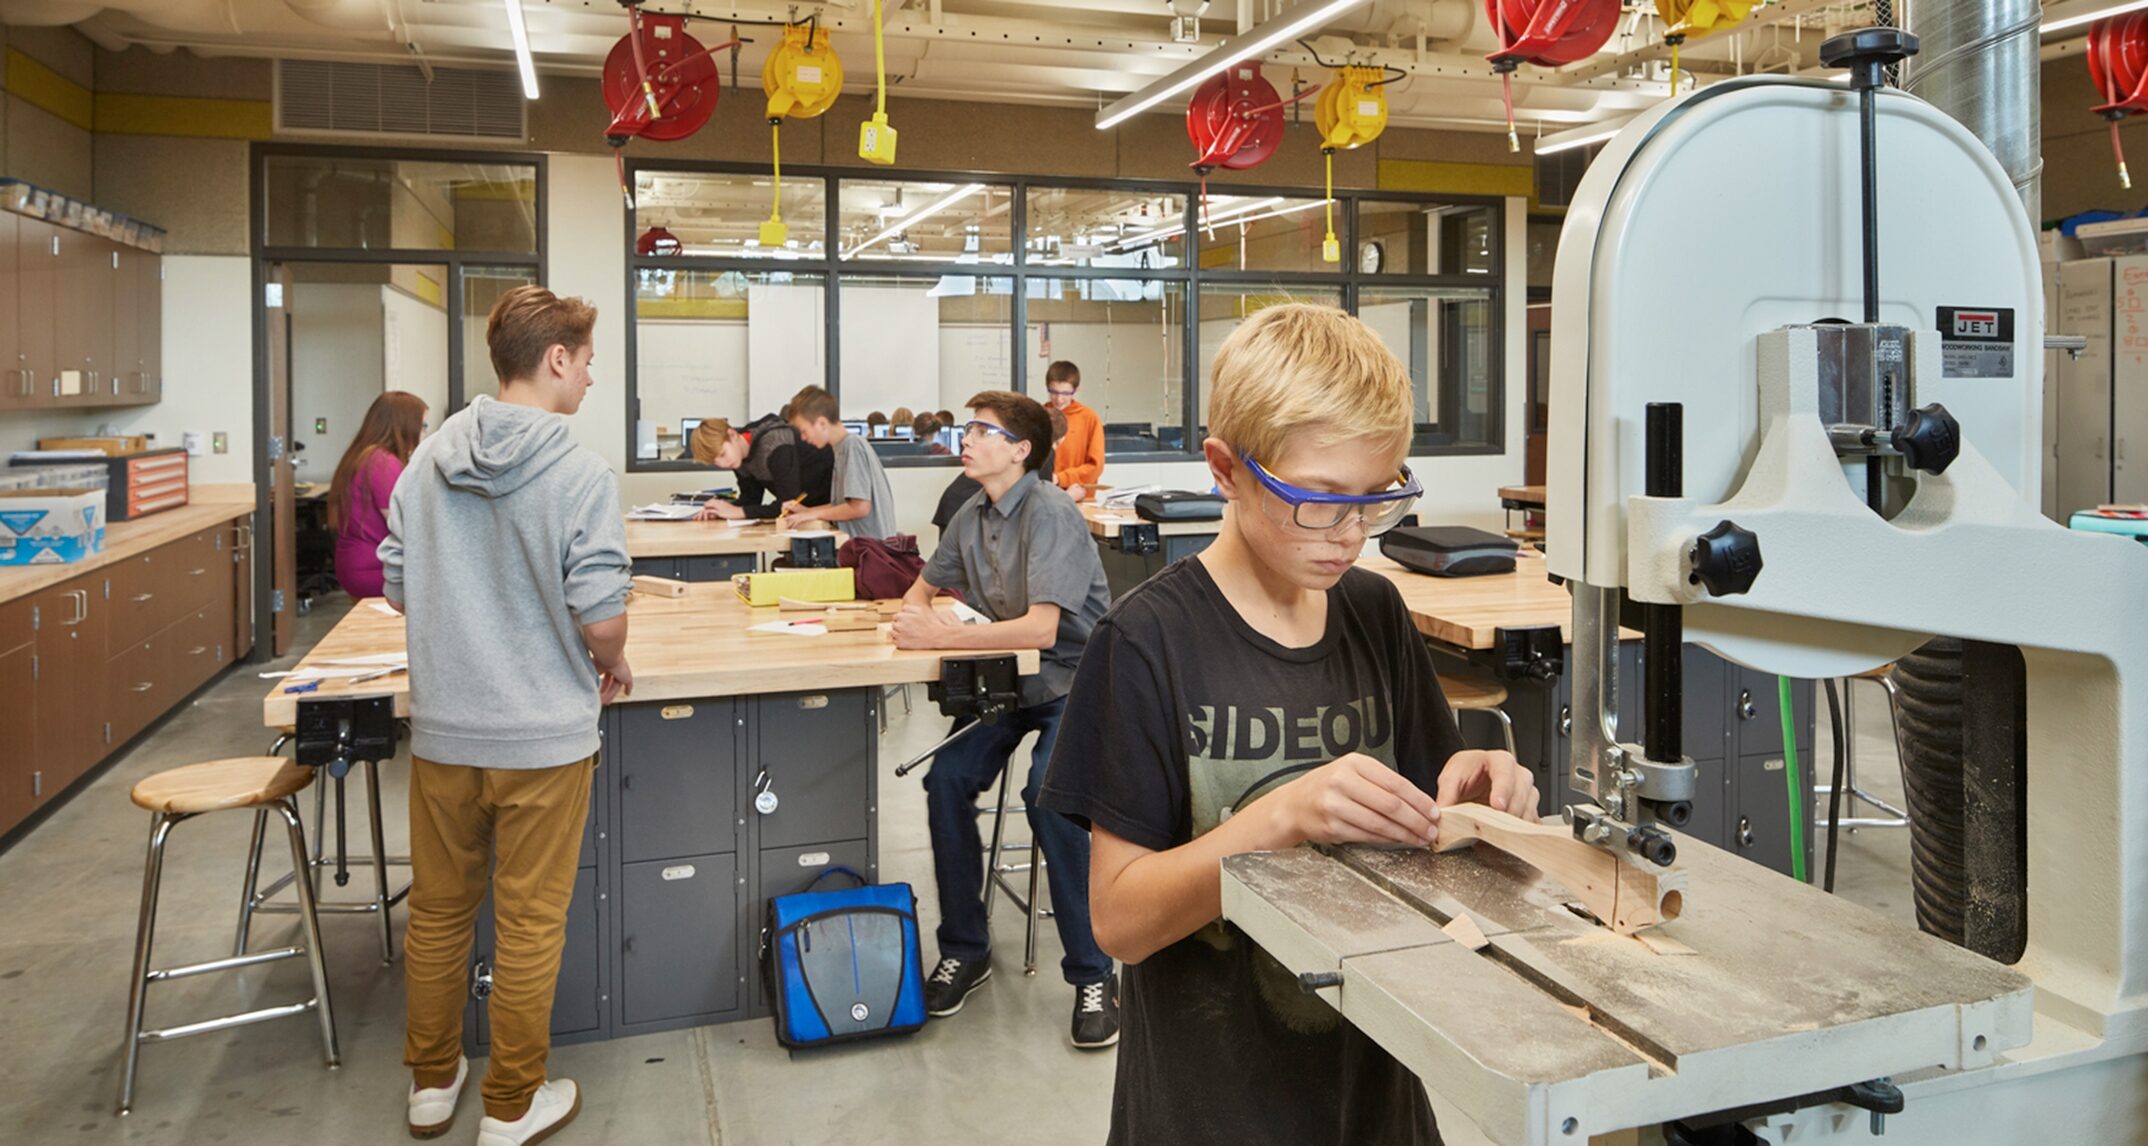 The makerspace at Salk Middle School features complementary spaces for making. A shop, or “dirty” making space is supported by a “clean” research space beyond which houses computers, 3D printers, and other supporting devices. – NAC